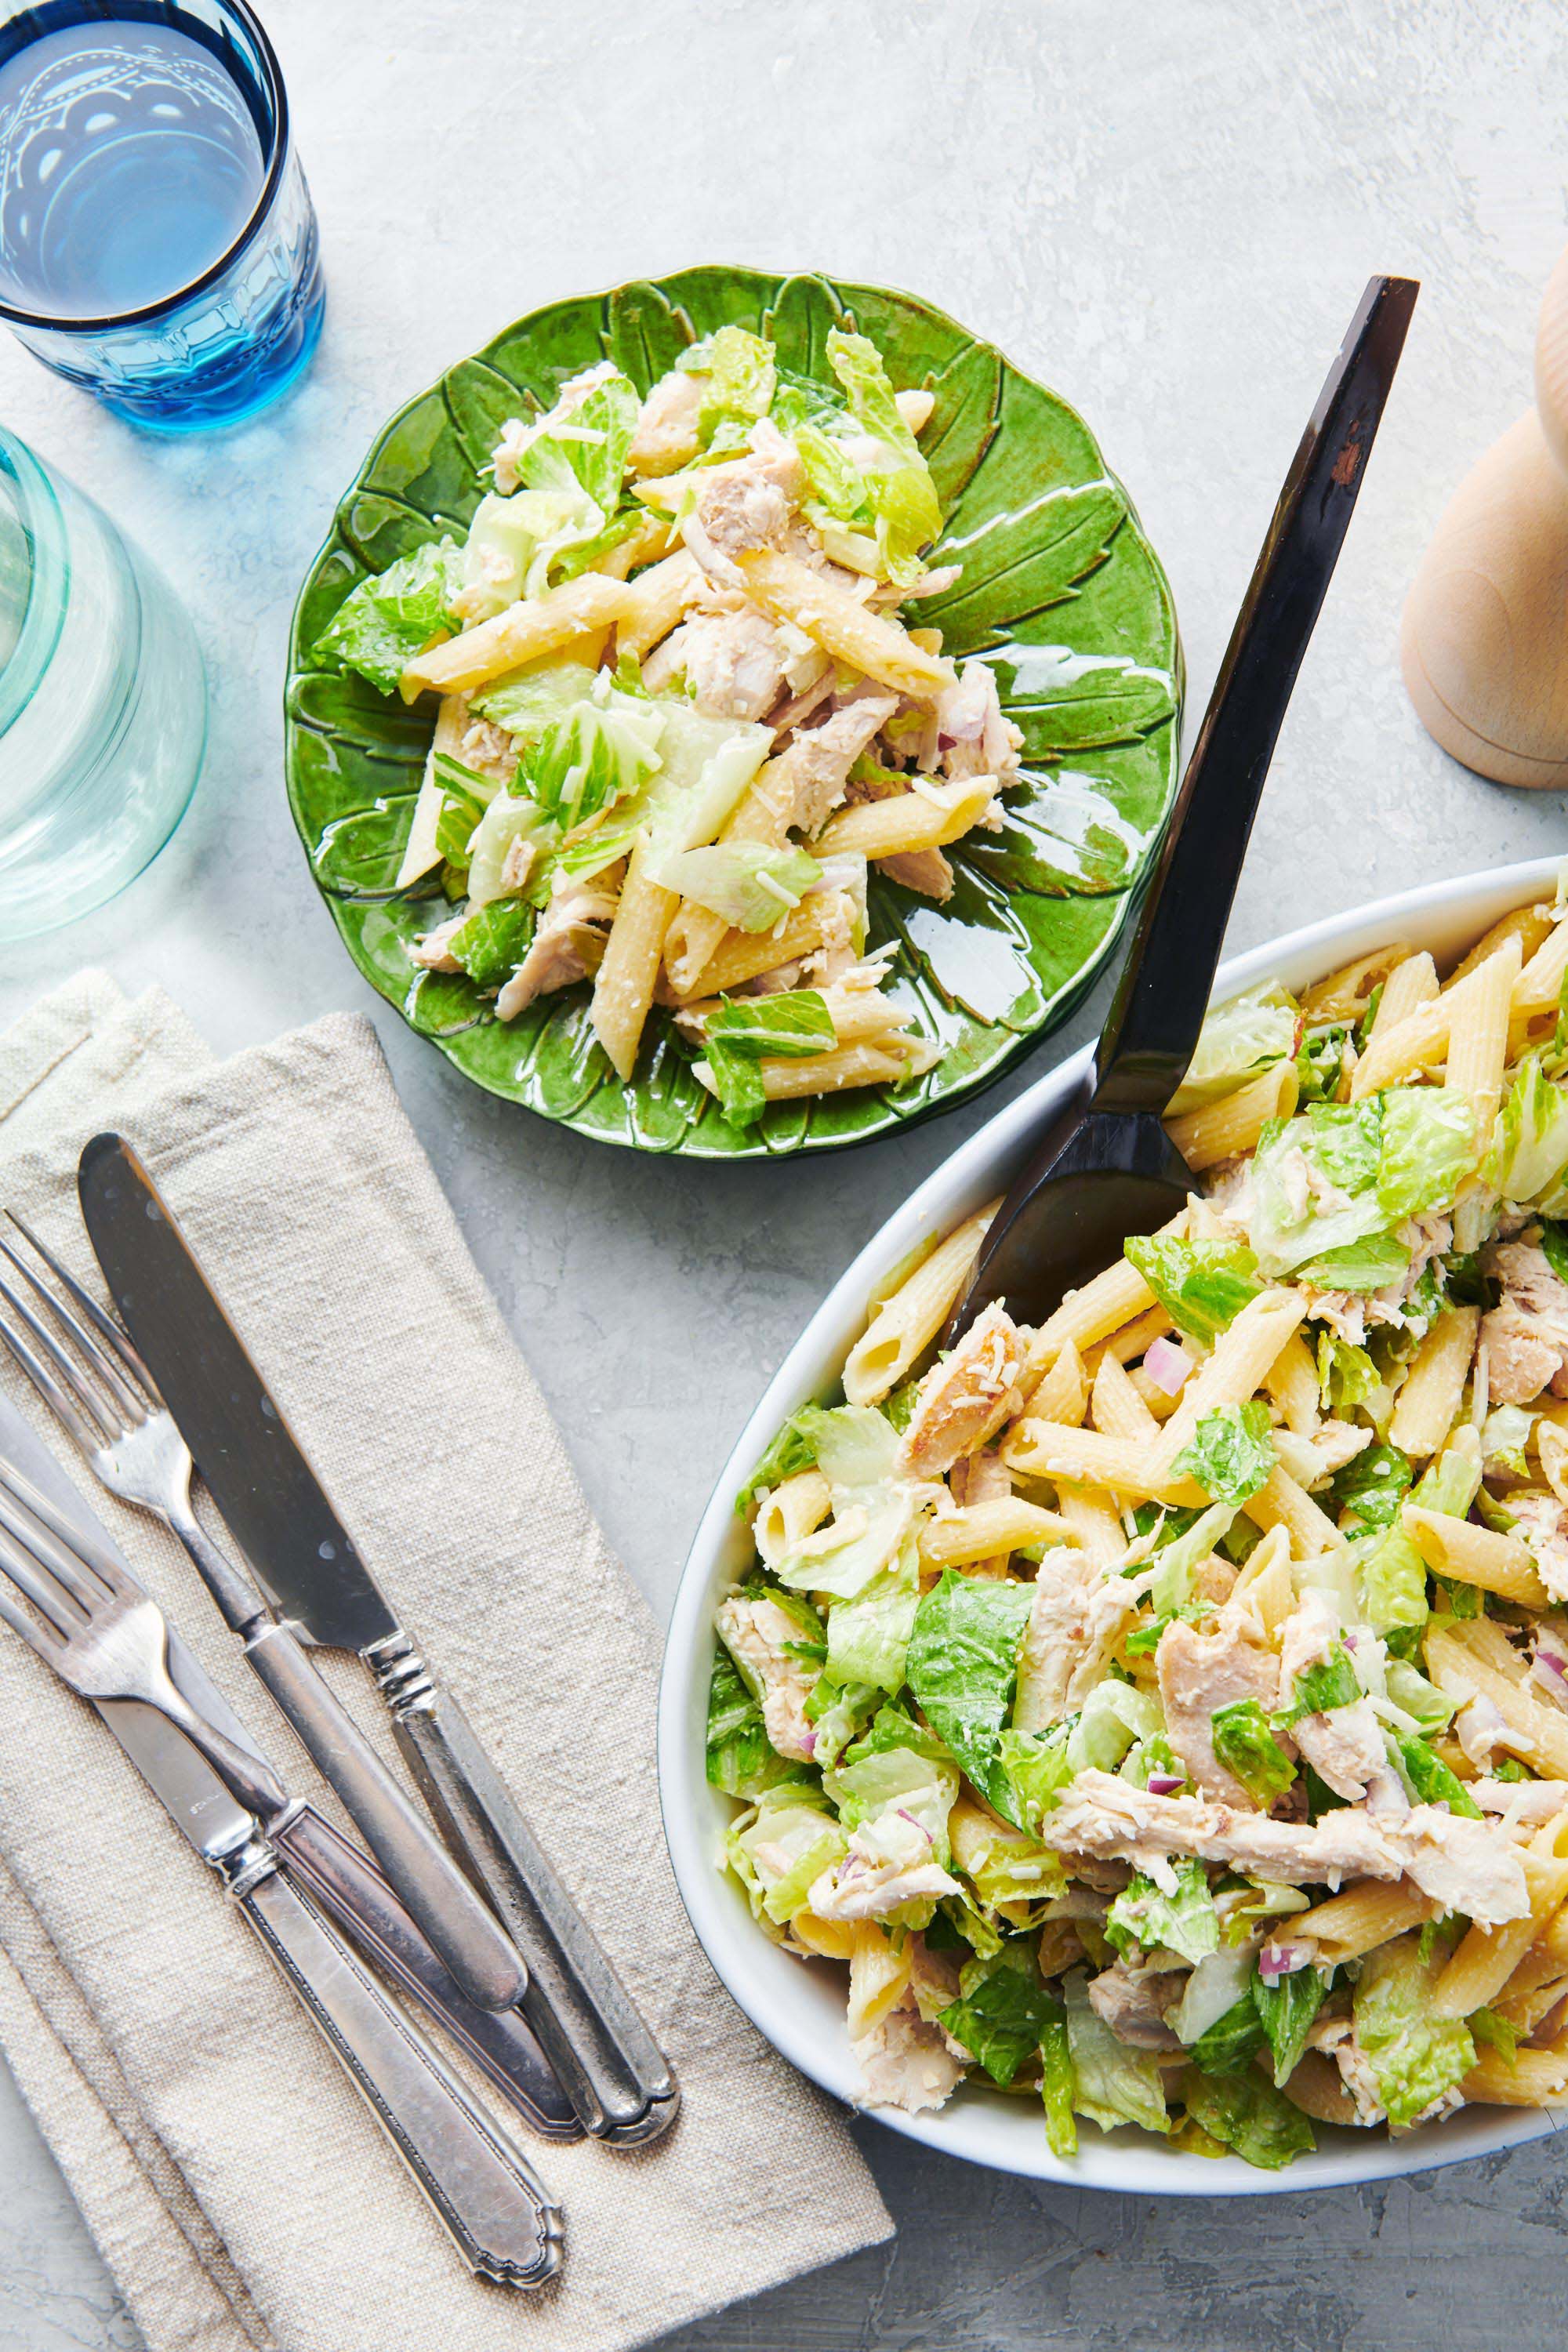 Chicken Caesar Pasta Salad in a serving bowl with forks and knives on a napkin.